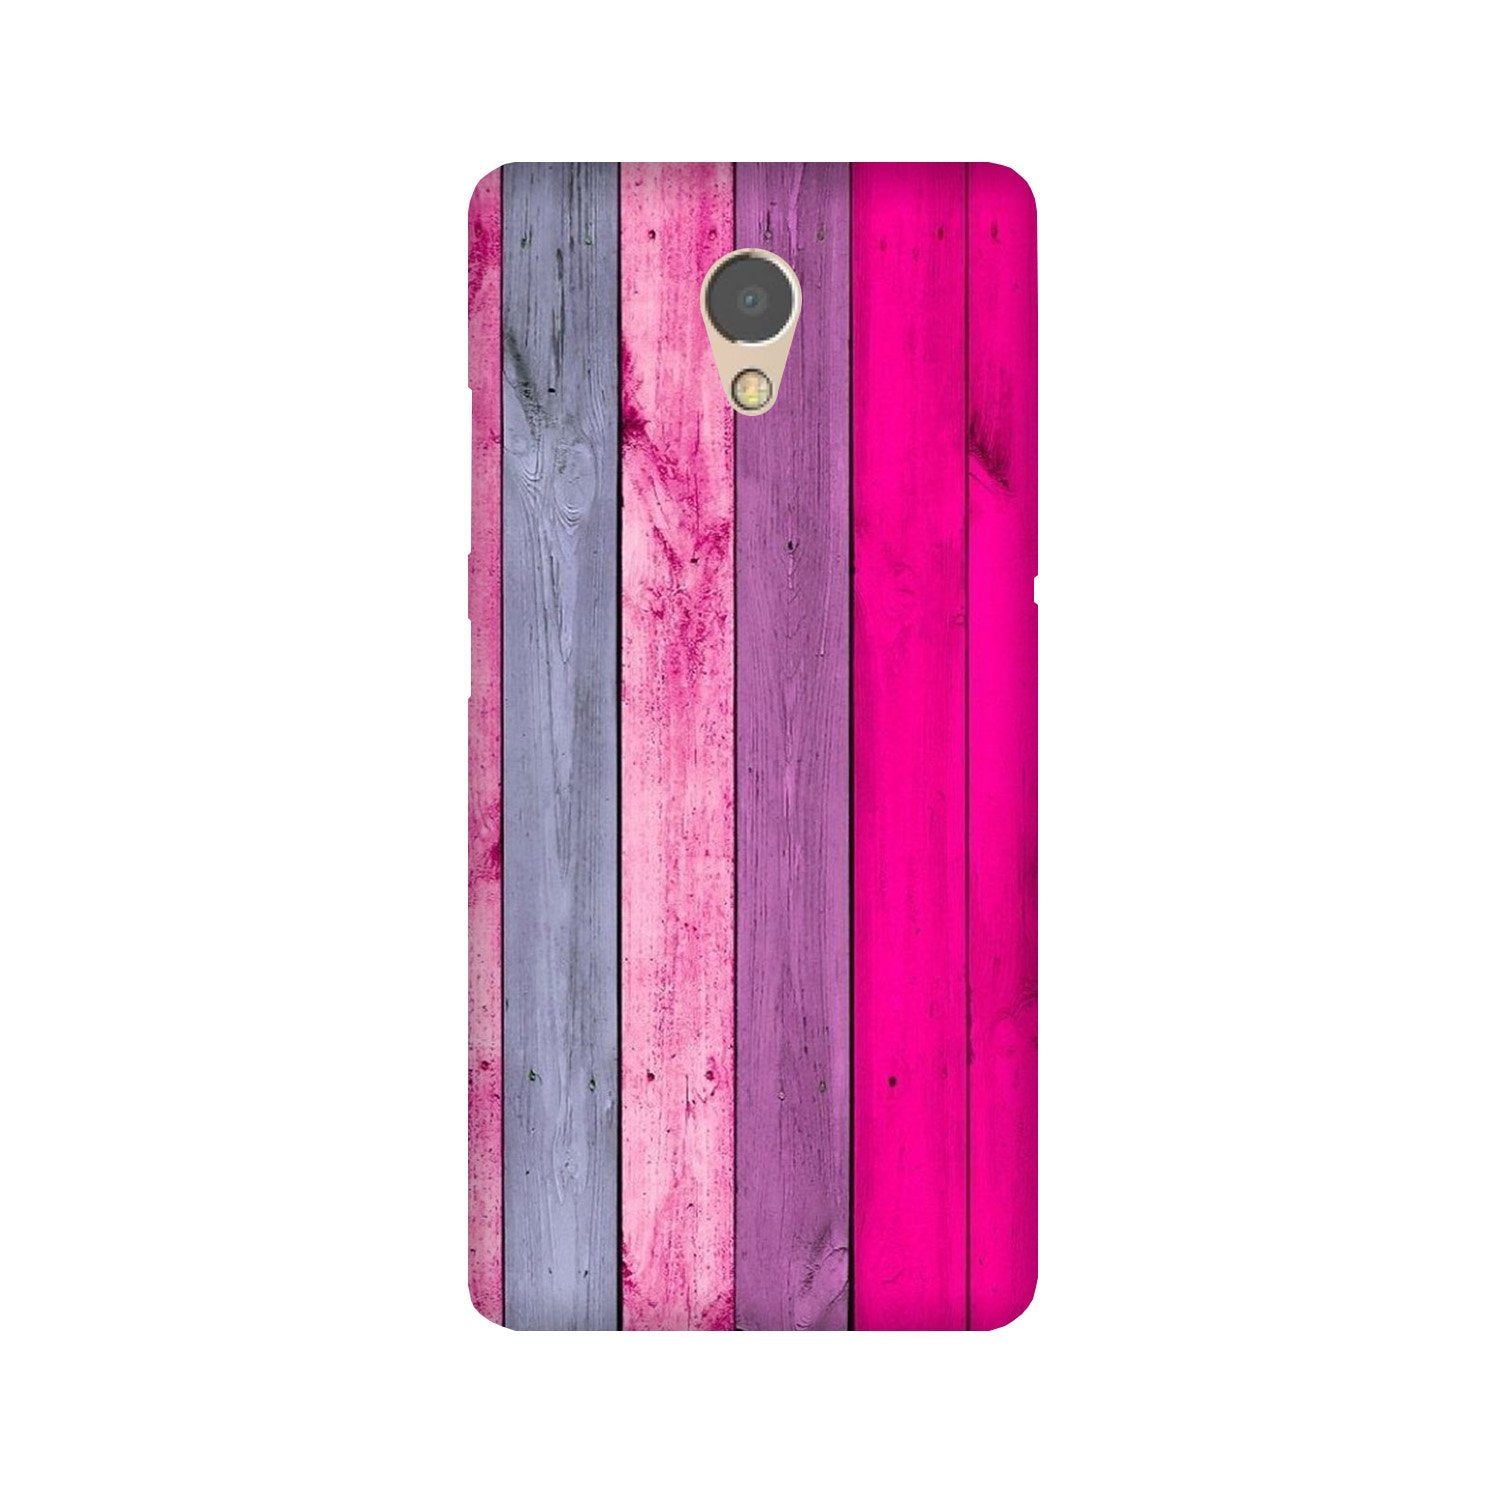 Wooden look Case for Lenovo P2